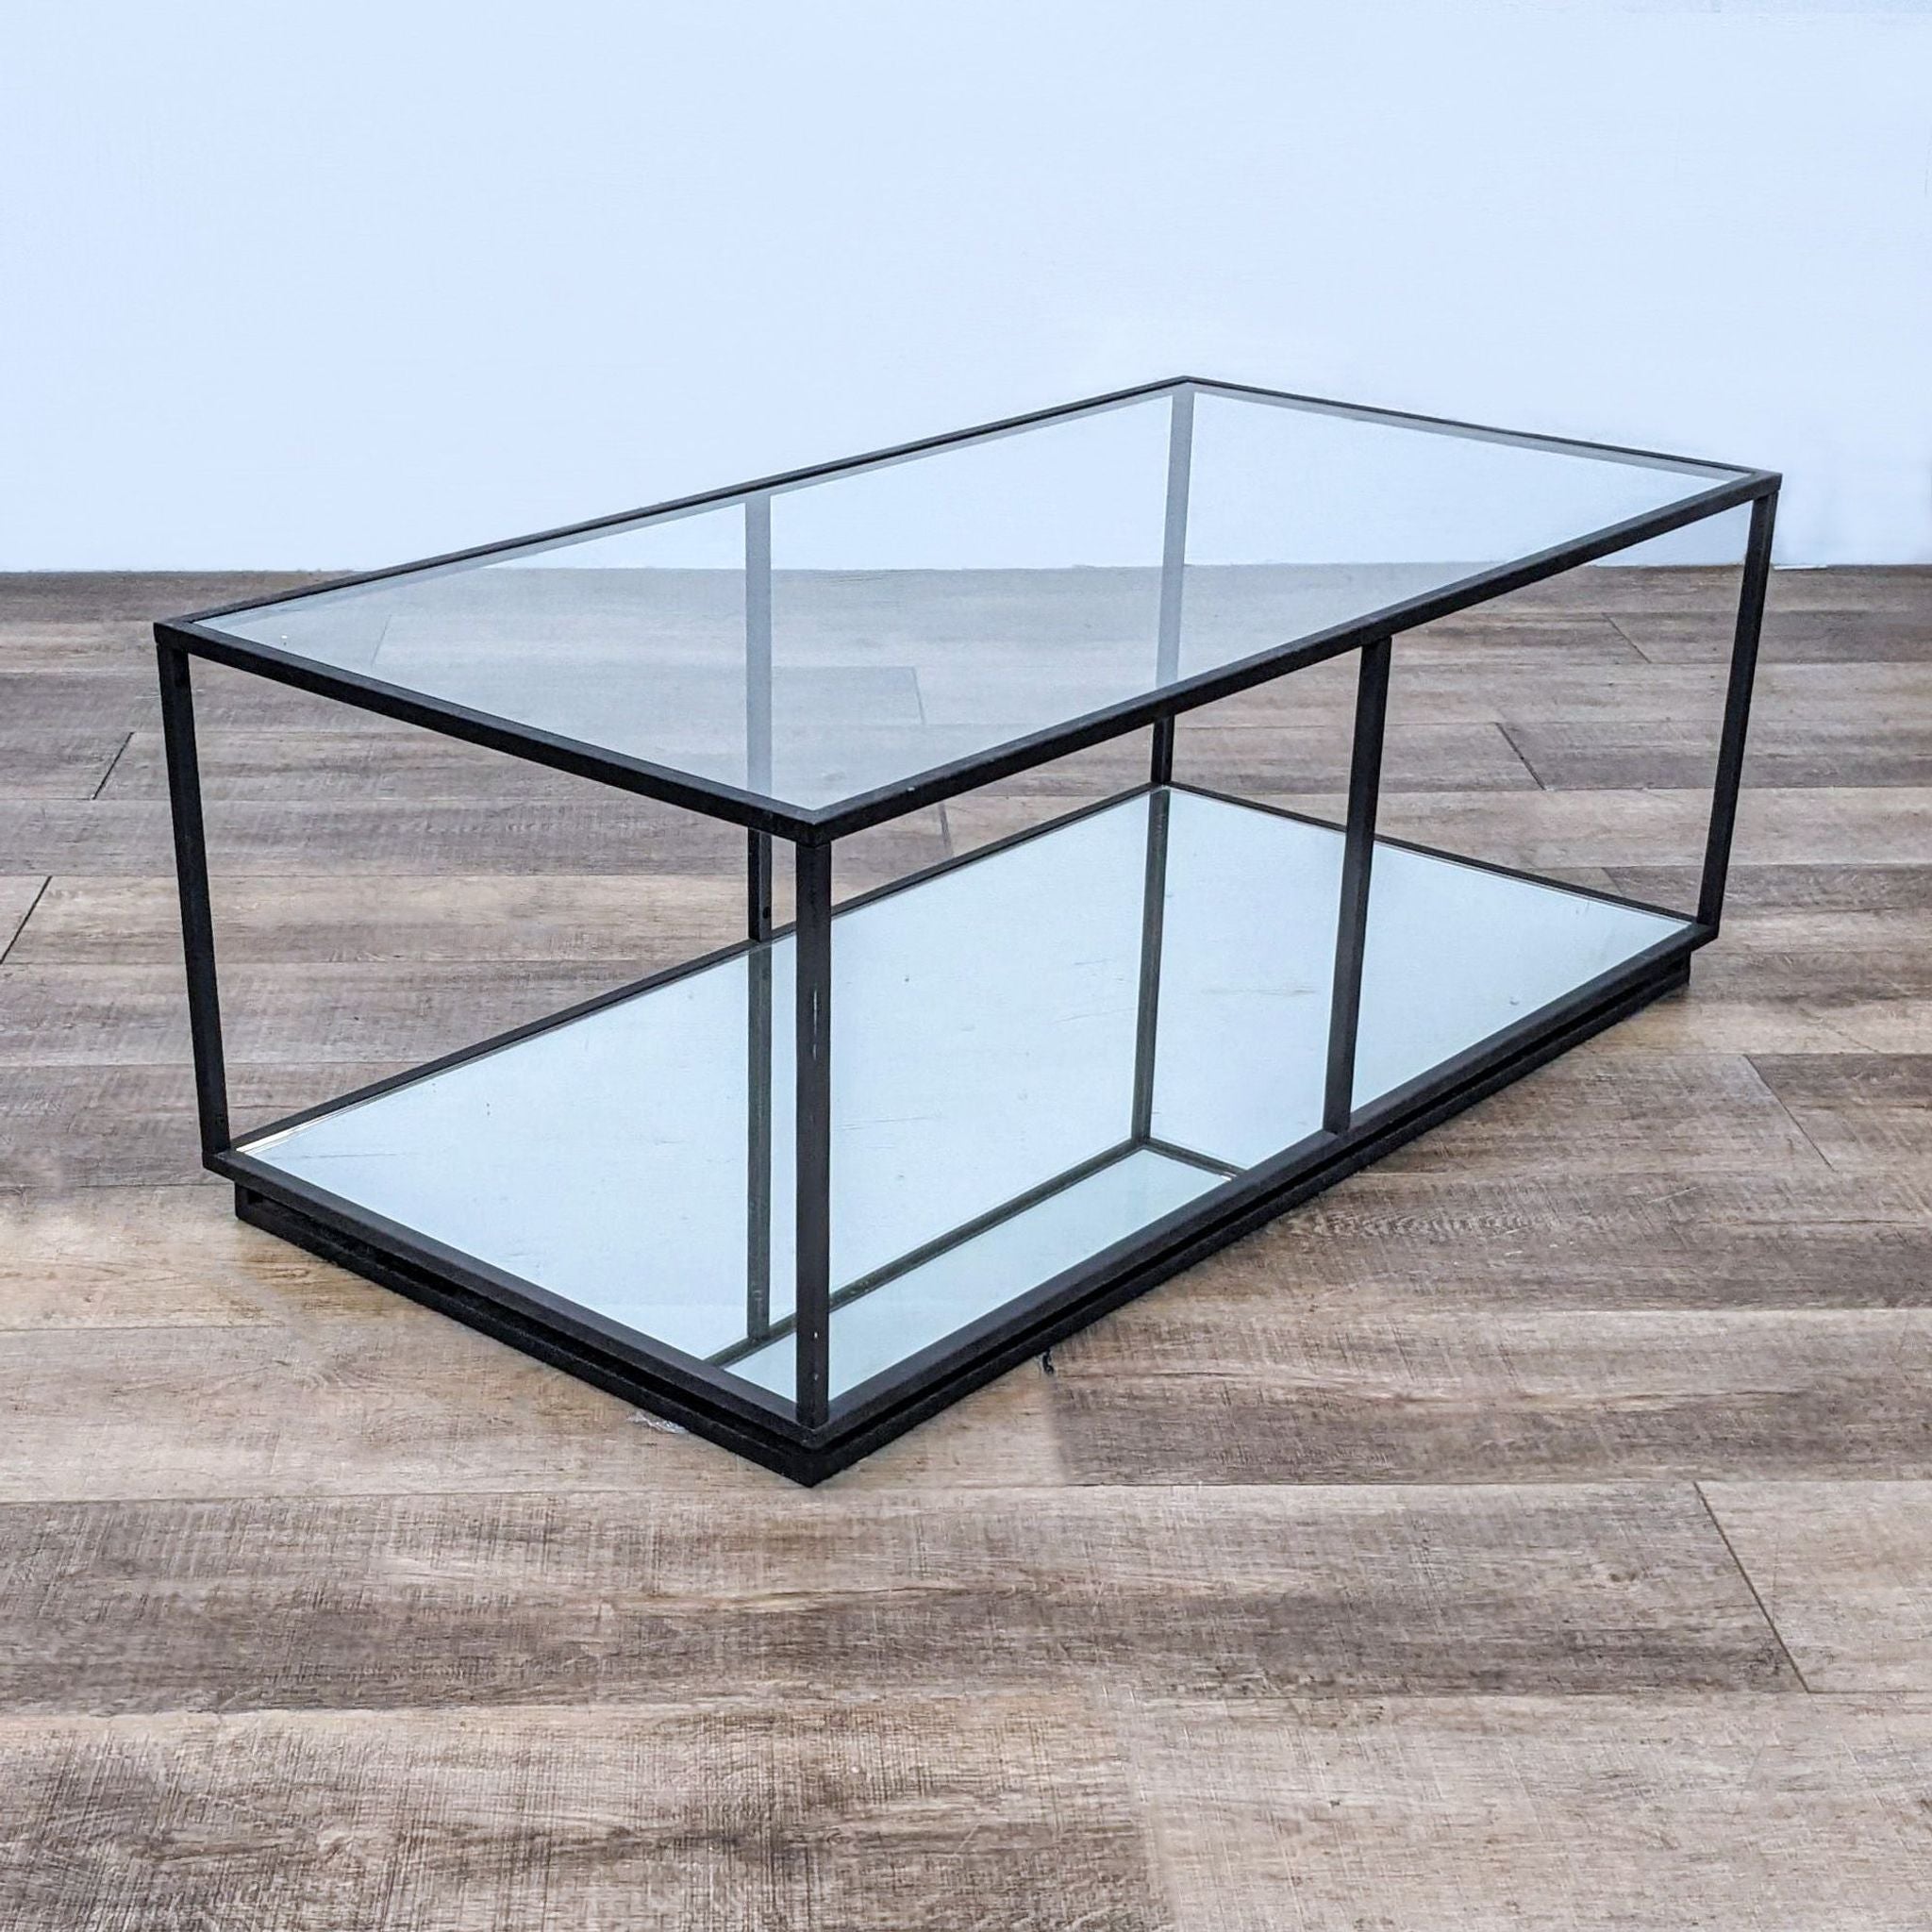 Reperch metal box frame coffee table with glass top and lower shelf on wooden floor.